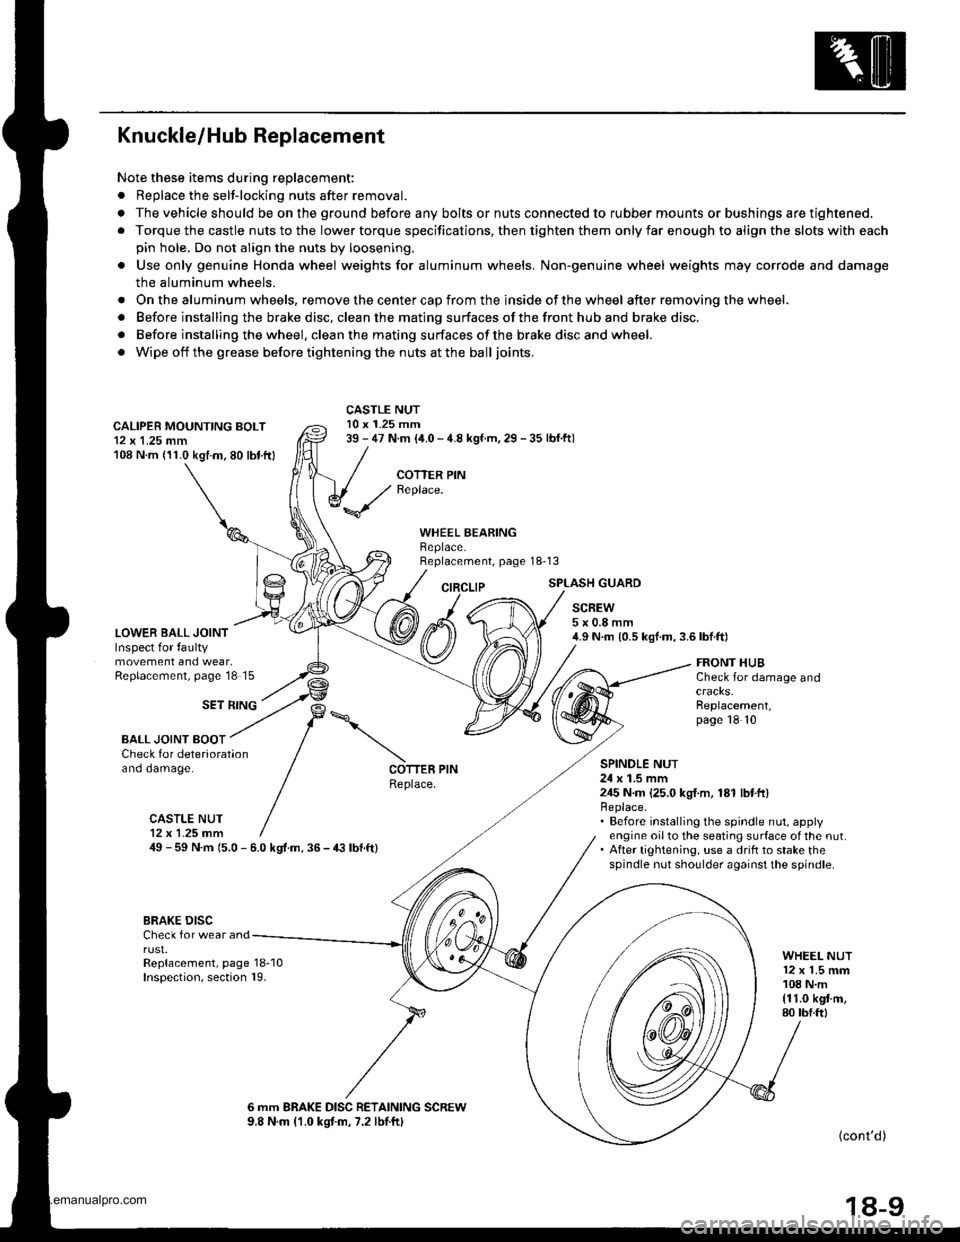 HONDA CR-V 1998 RD1-RD3 / 1.G Workshop Manual 
Knuckle/Hub Replacement
Note these items during replacement:
. Replace the selt-locking nuts after removal.
. The vehicle should be on the ground before any bolts or nuts connected to rubber mounts o